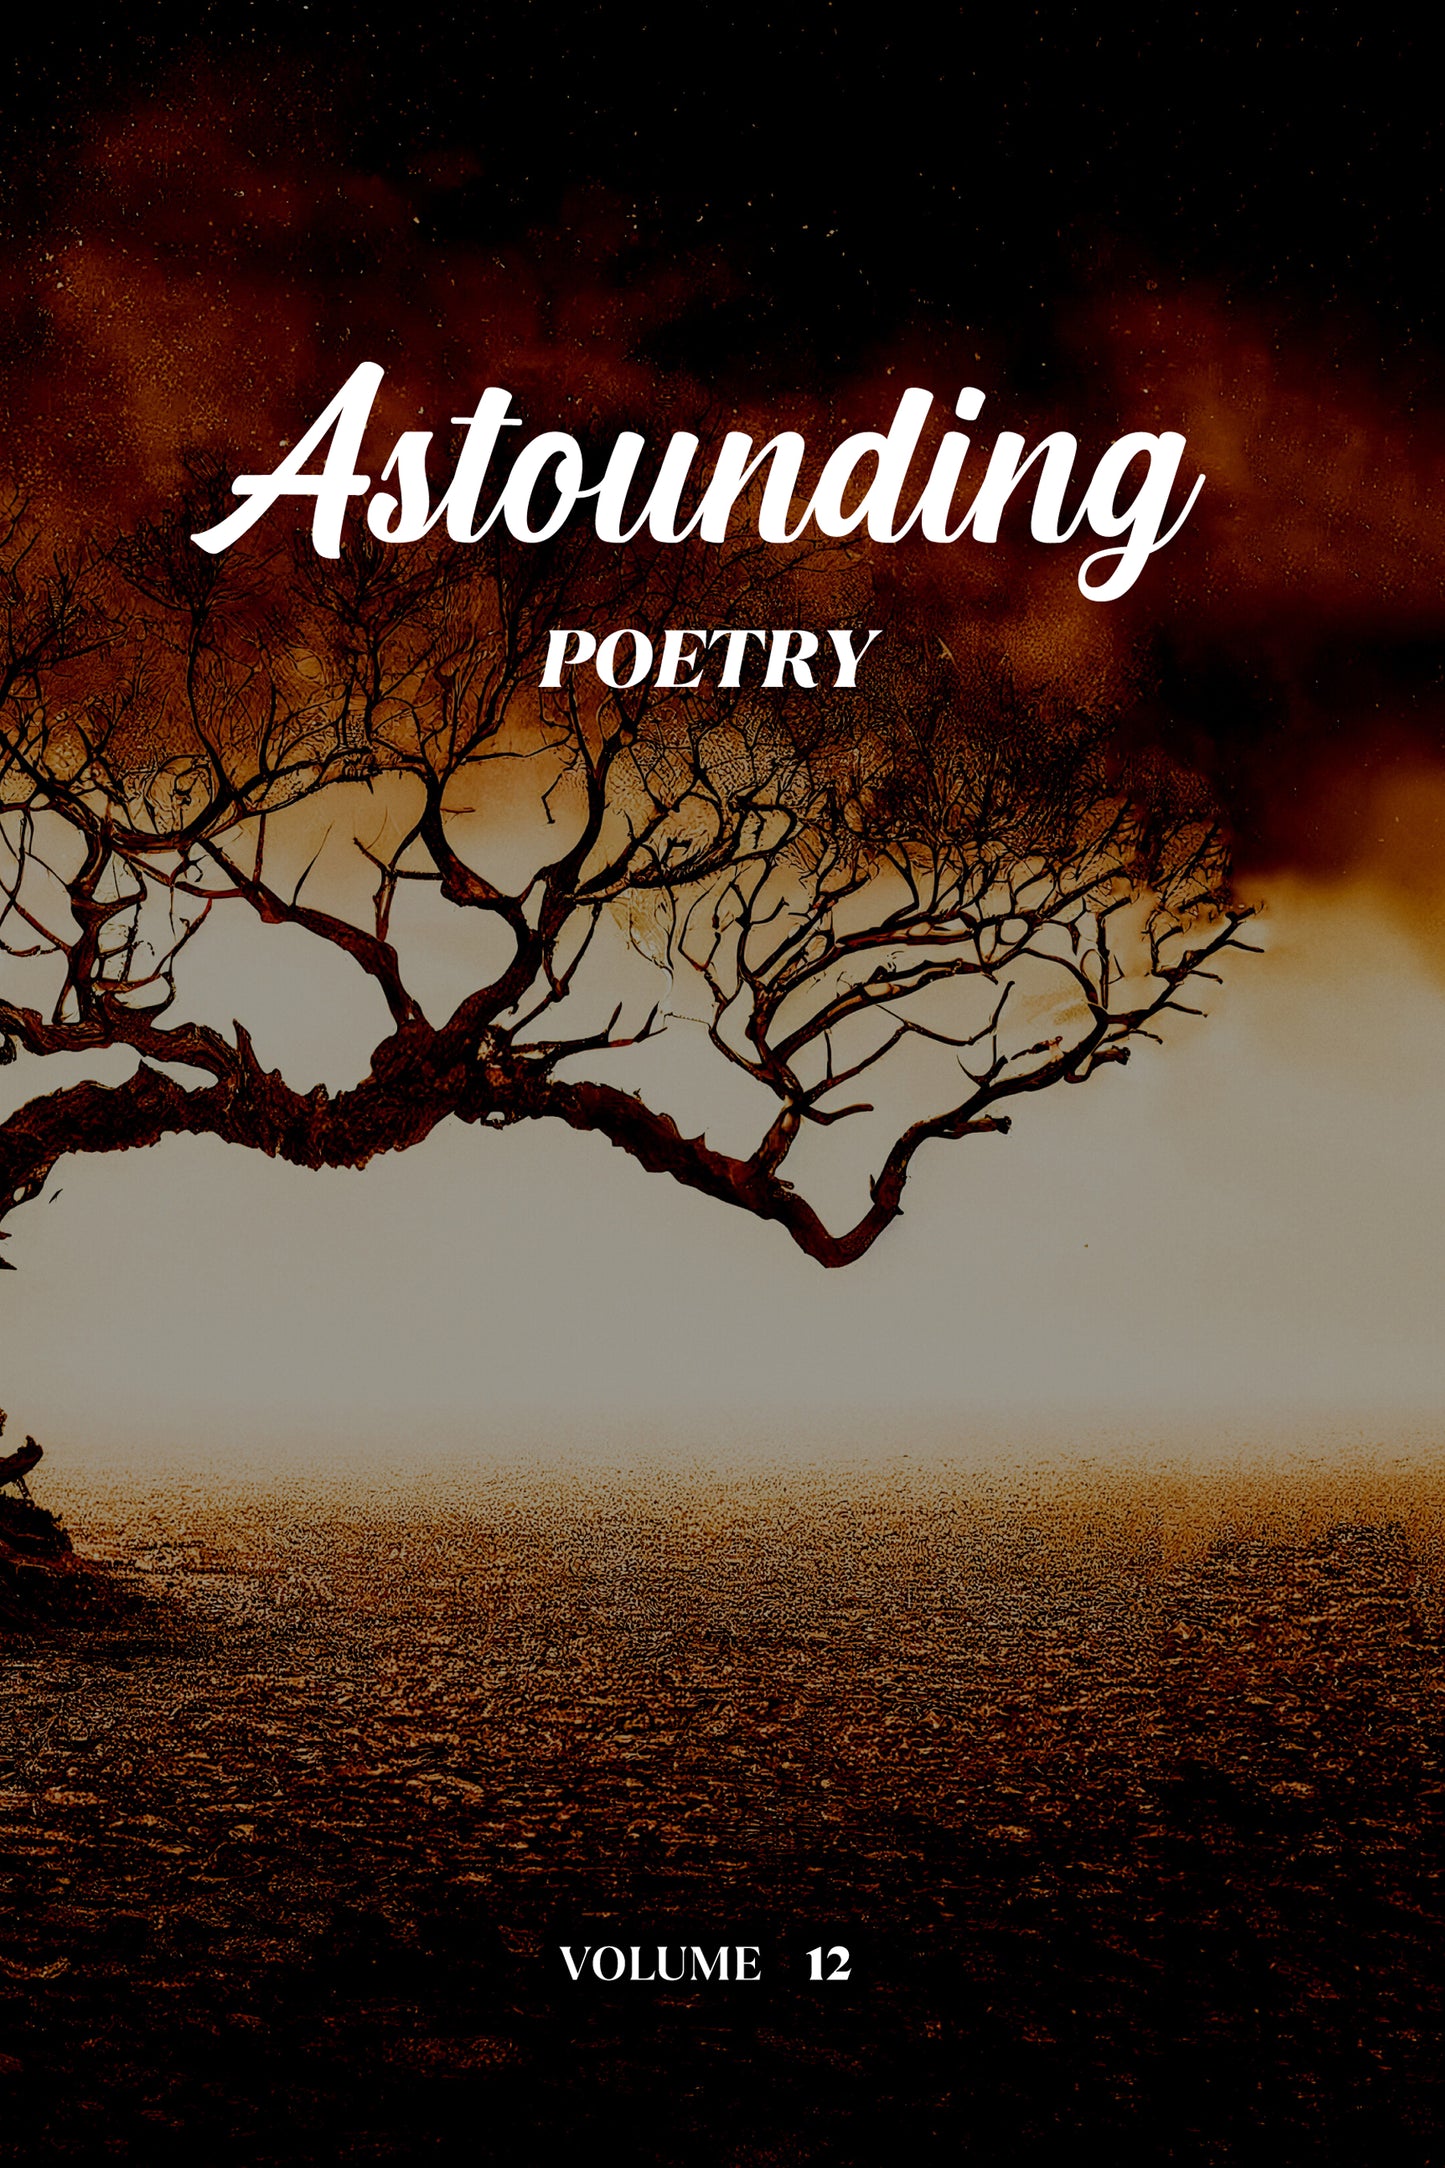 Astounding Poetry (Volume 12) - Physical Book